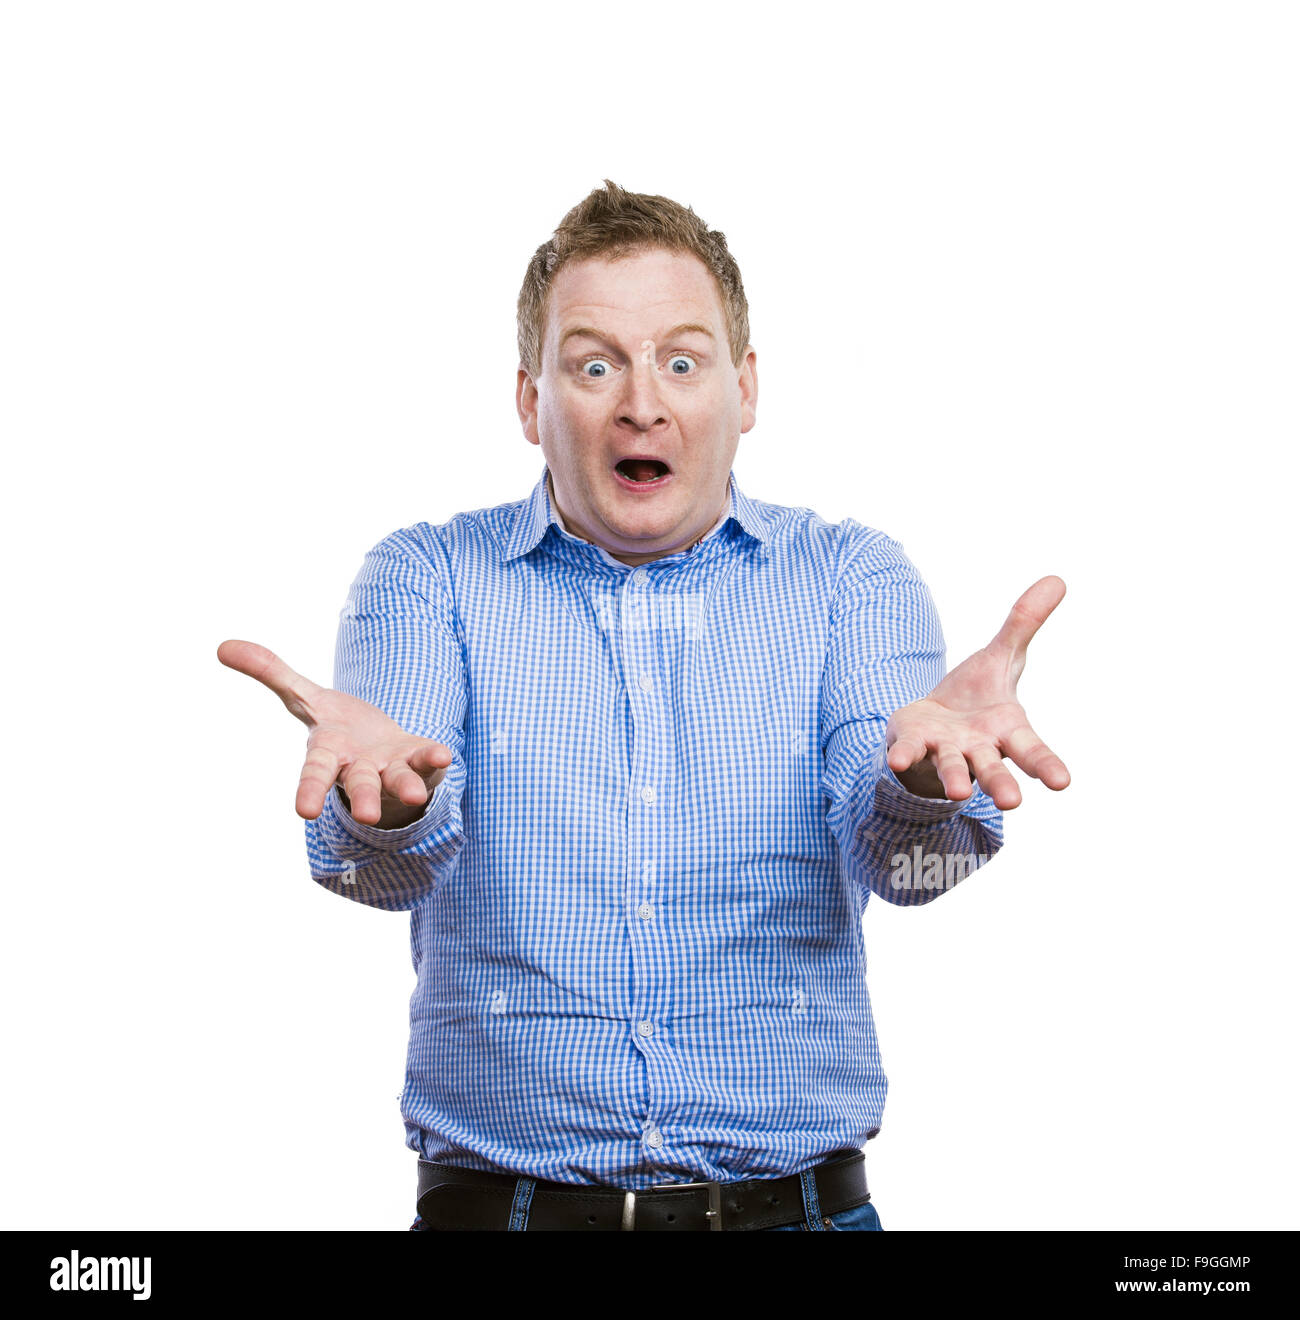 Funny young adult showing his emotions expressively by his gestures and mimics . Studio shot on white background. Stock Photo